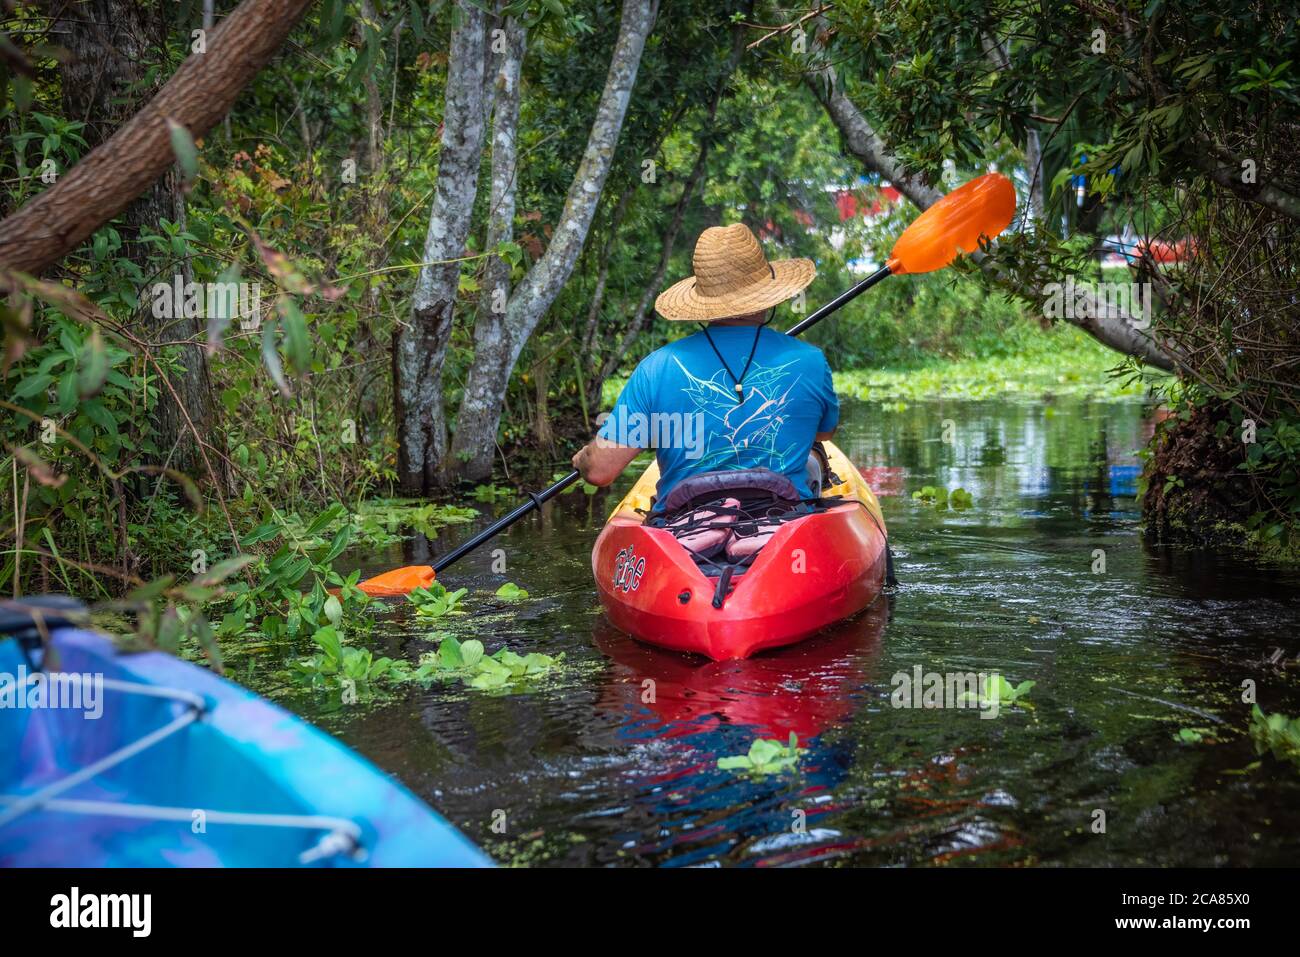 Kayakers returning to the North Guana Outpost after a kayaking excursion in the coastal marsh waters of the Guana River in Ponte Vedra Beach, Florida. Stock Photo